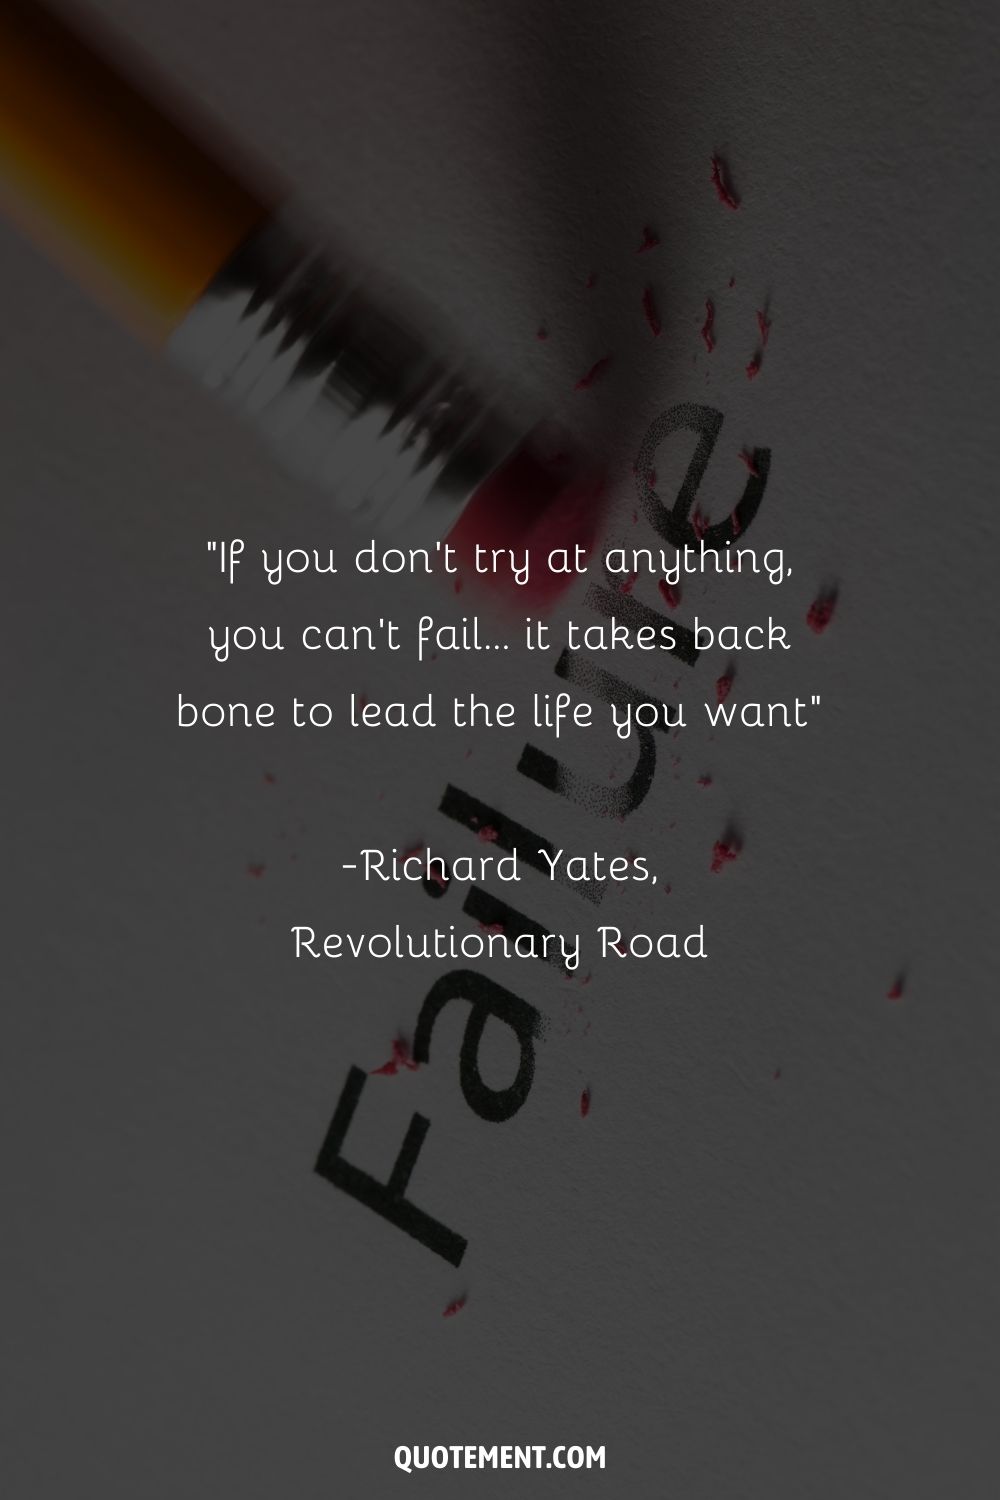 “if you don’t try at anything, you can’t fail… it takes back bone to lead the life you want” ― Richard Yates, Revolutionary Road